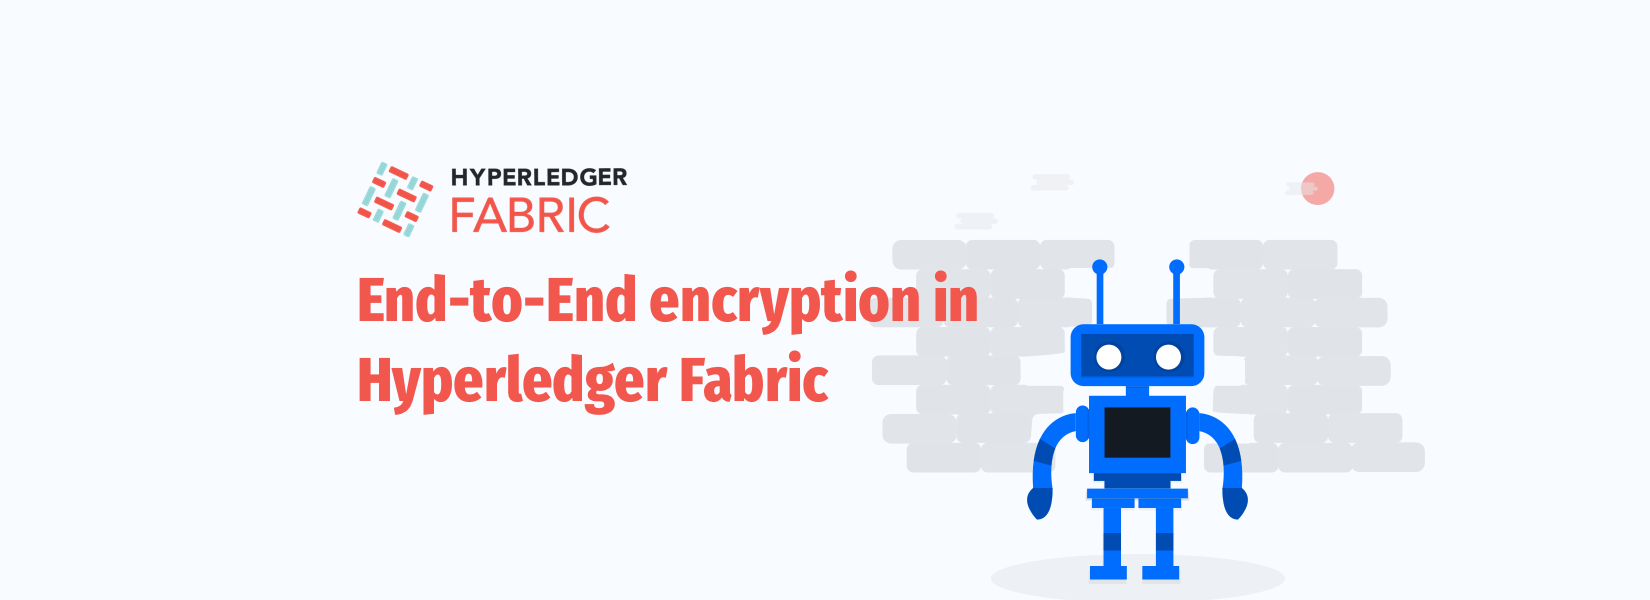 How to Build an End-to-End encryption in Hyperledger Fabric